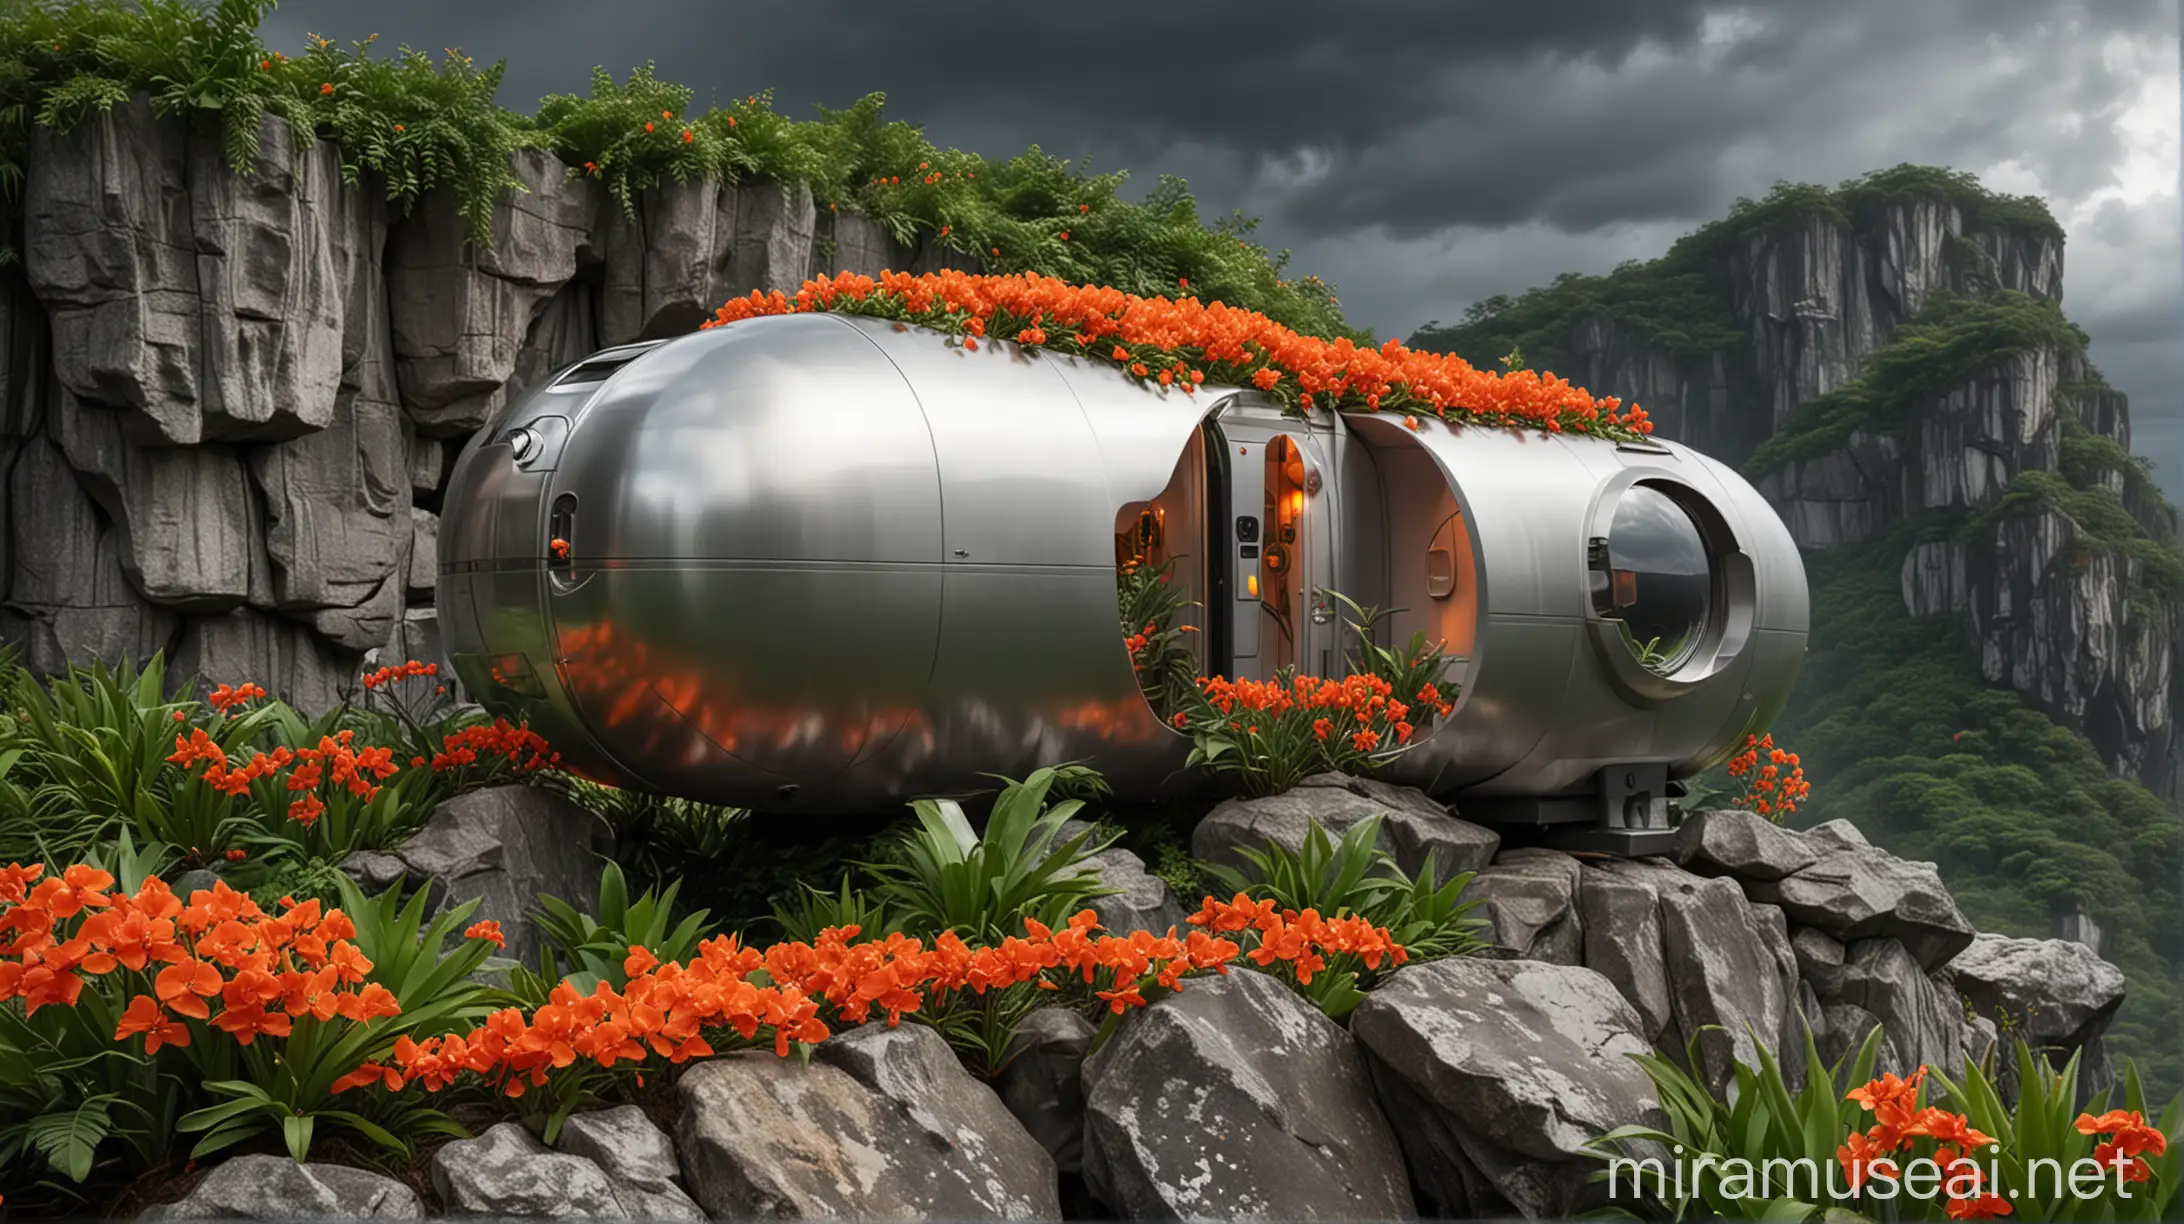 A hyper-realistic, wide-angle shot of a sleek, silver mini capsule house perched on a rocky outcrop, nestled amongst lush green foliage and vibrant orange orchids, with a dramatic, stormy sky in the background.